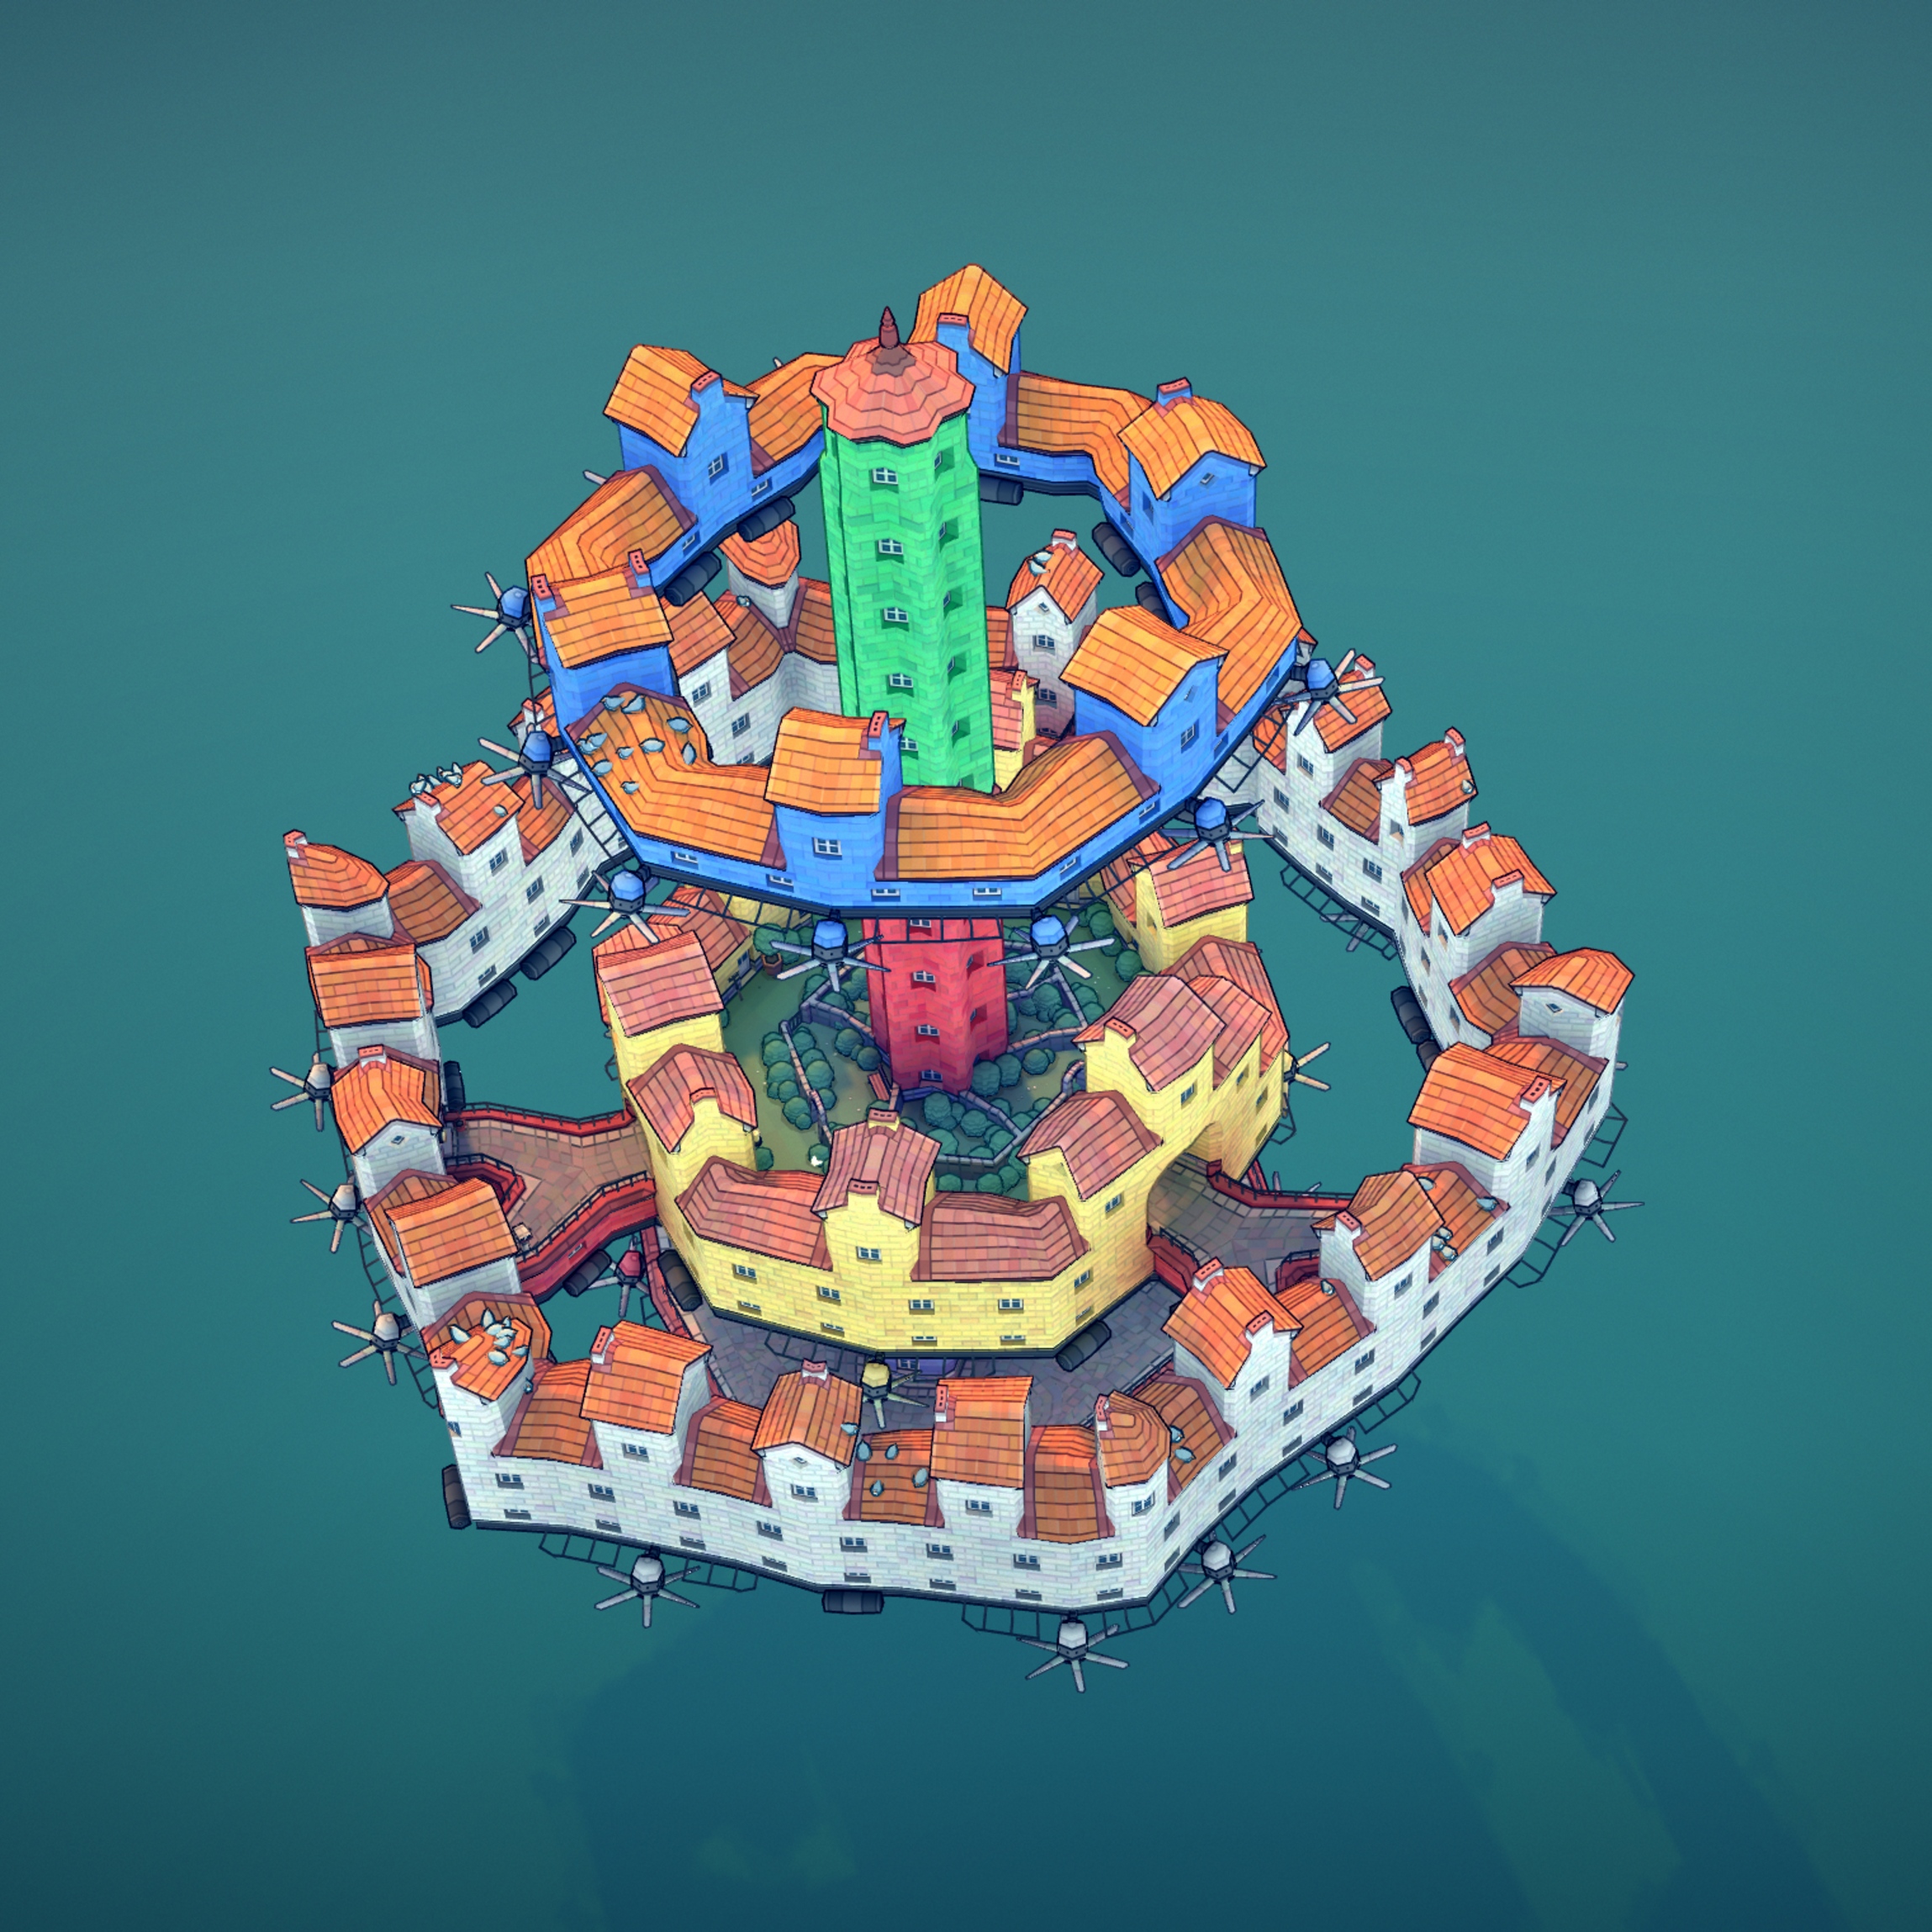 Townscaper Floating Island Build Tutorial Guide - How to Build a Simple Floating Island - 4229A7C